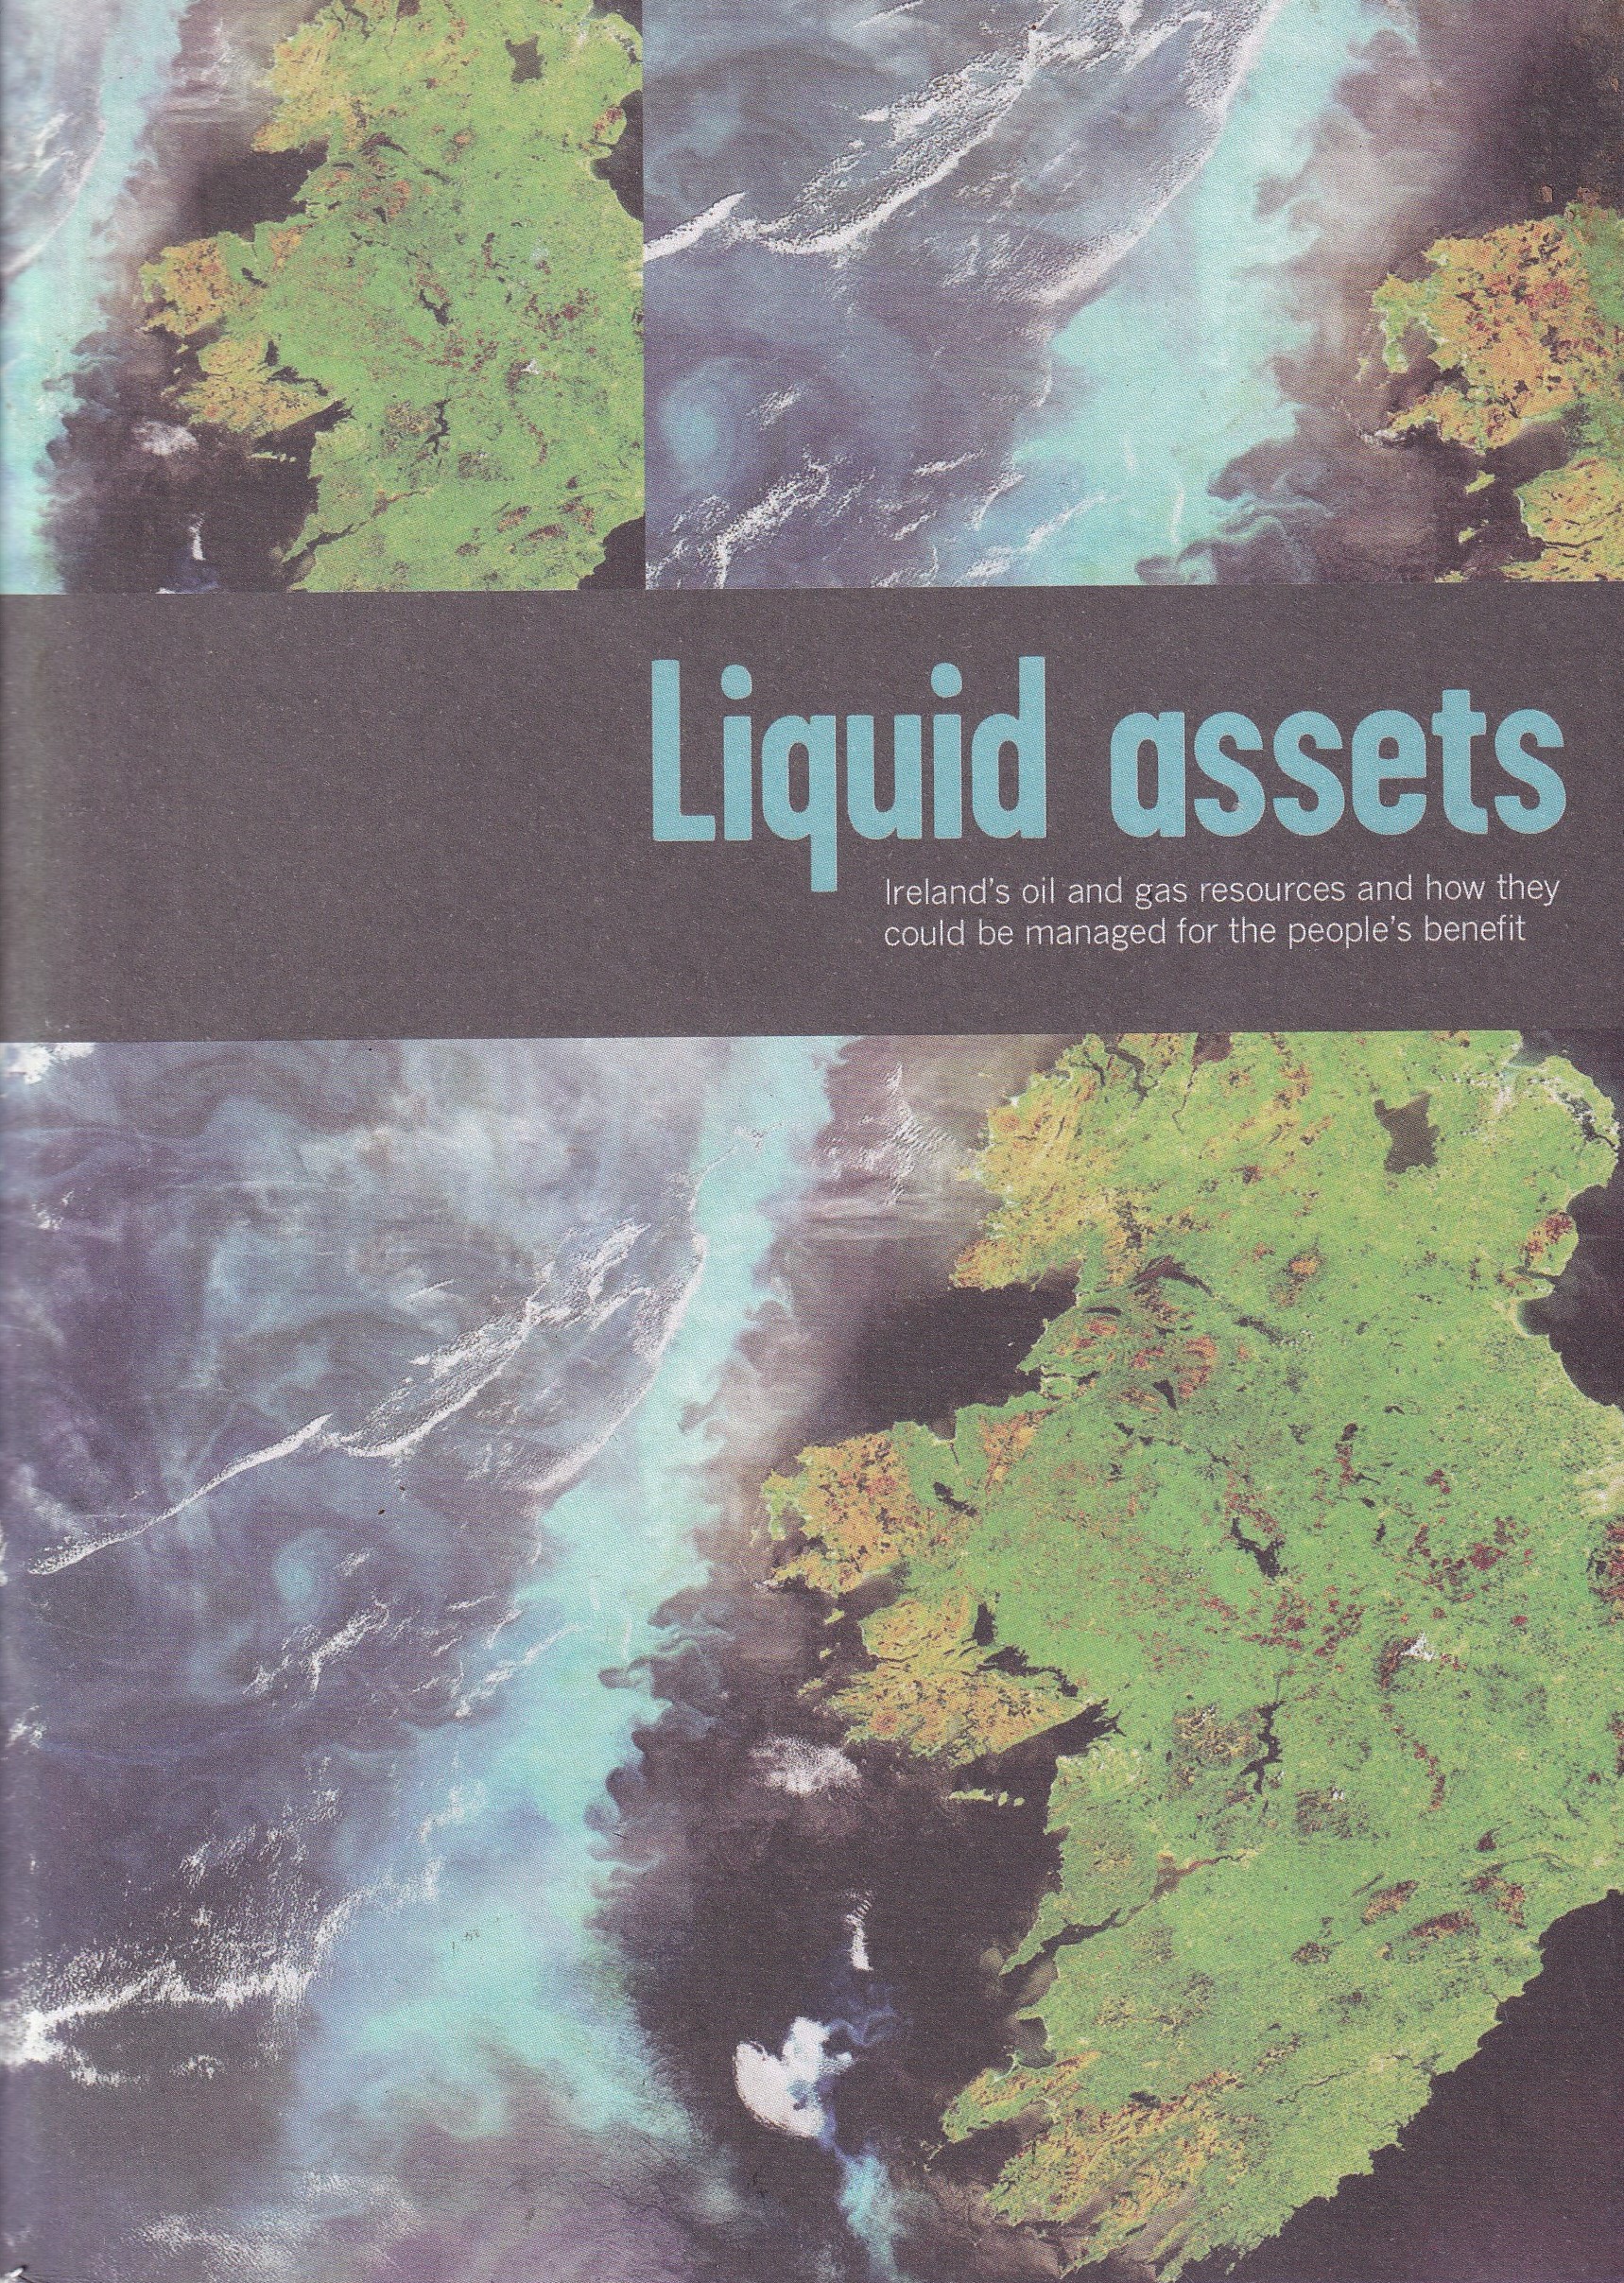 Liquid Assets; Ireland’s oil and gas resources and how they could be managed for the people’s benefit by Dublin Shell to Sea